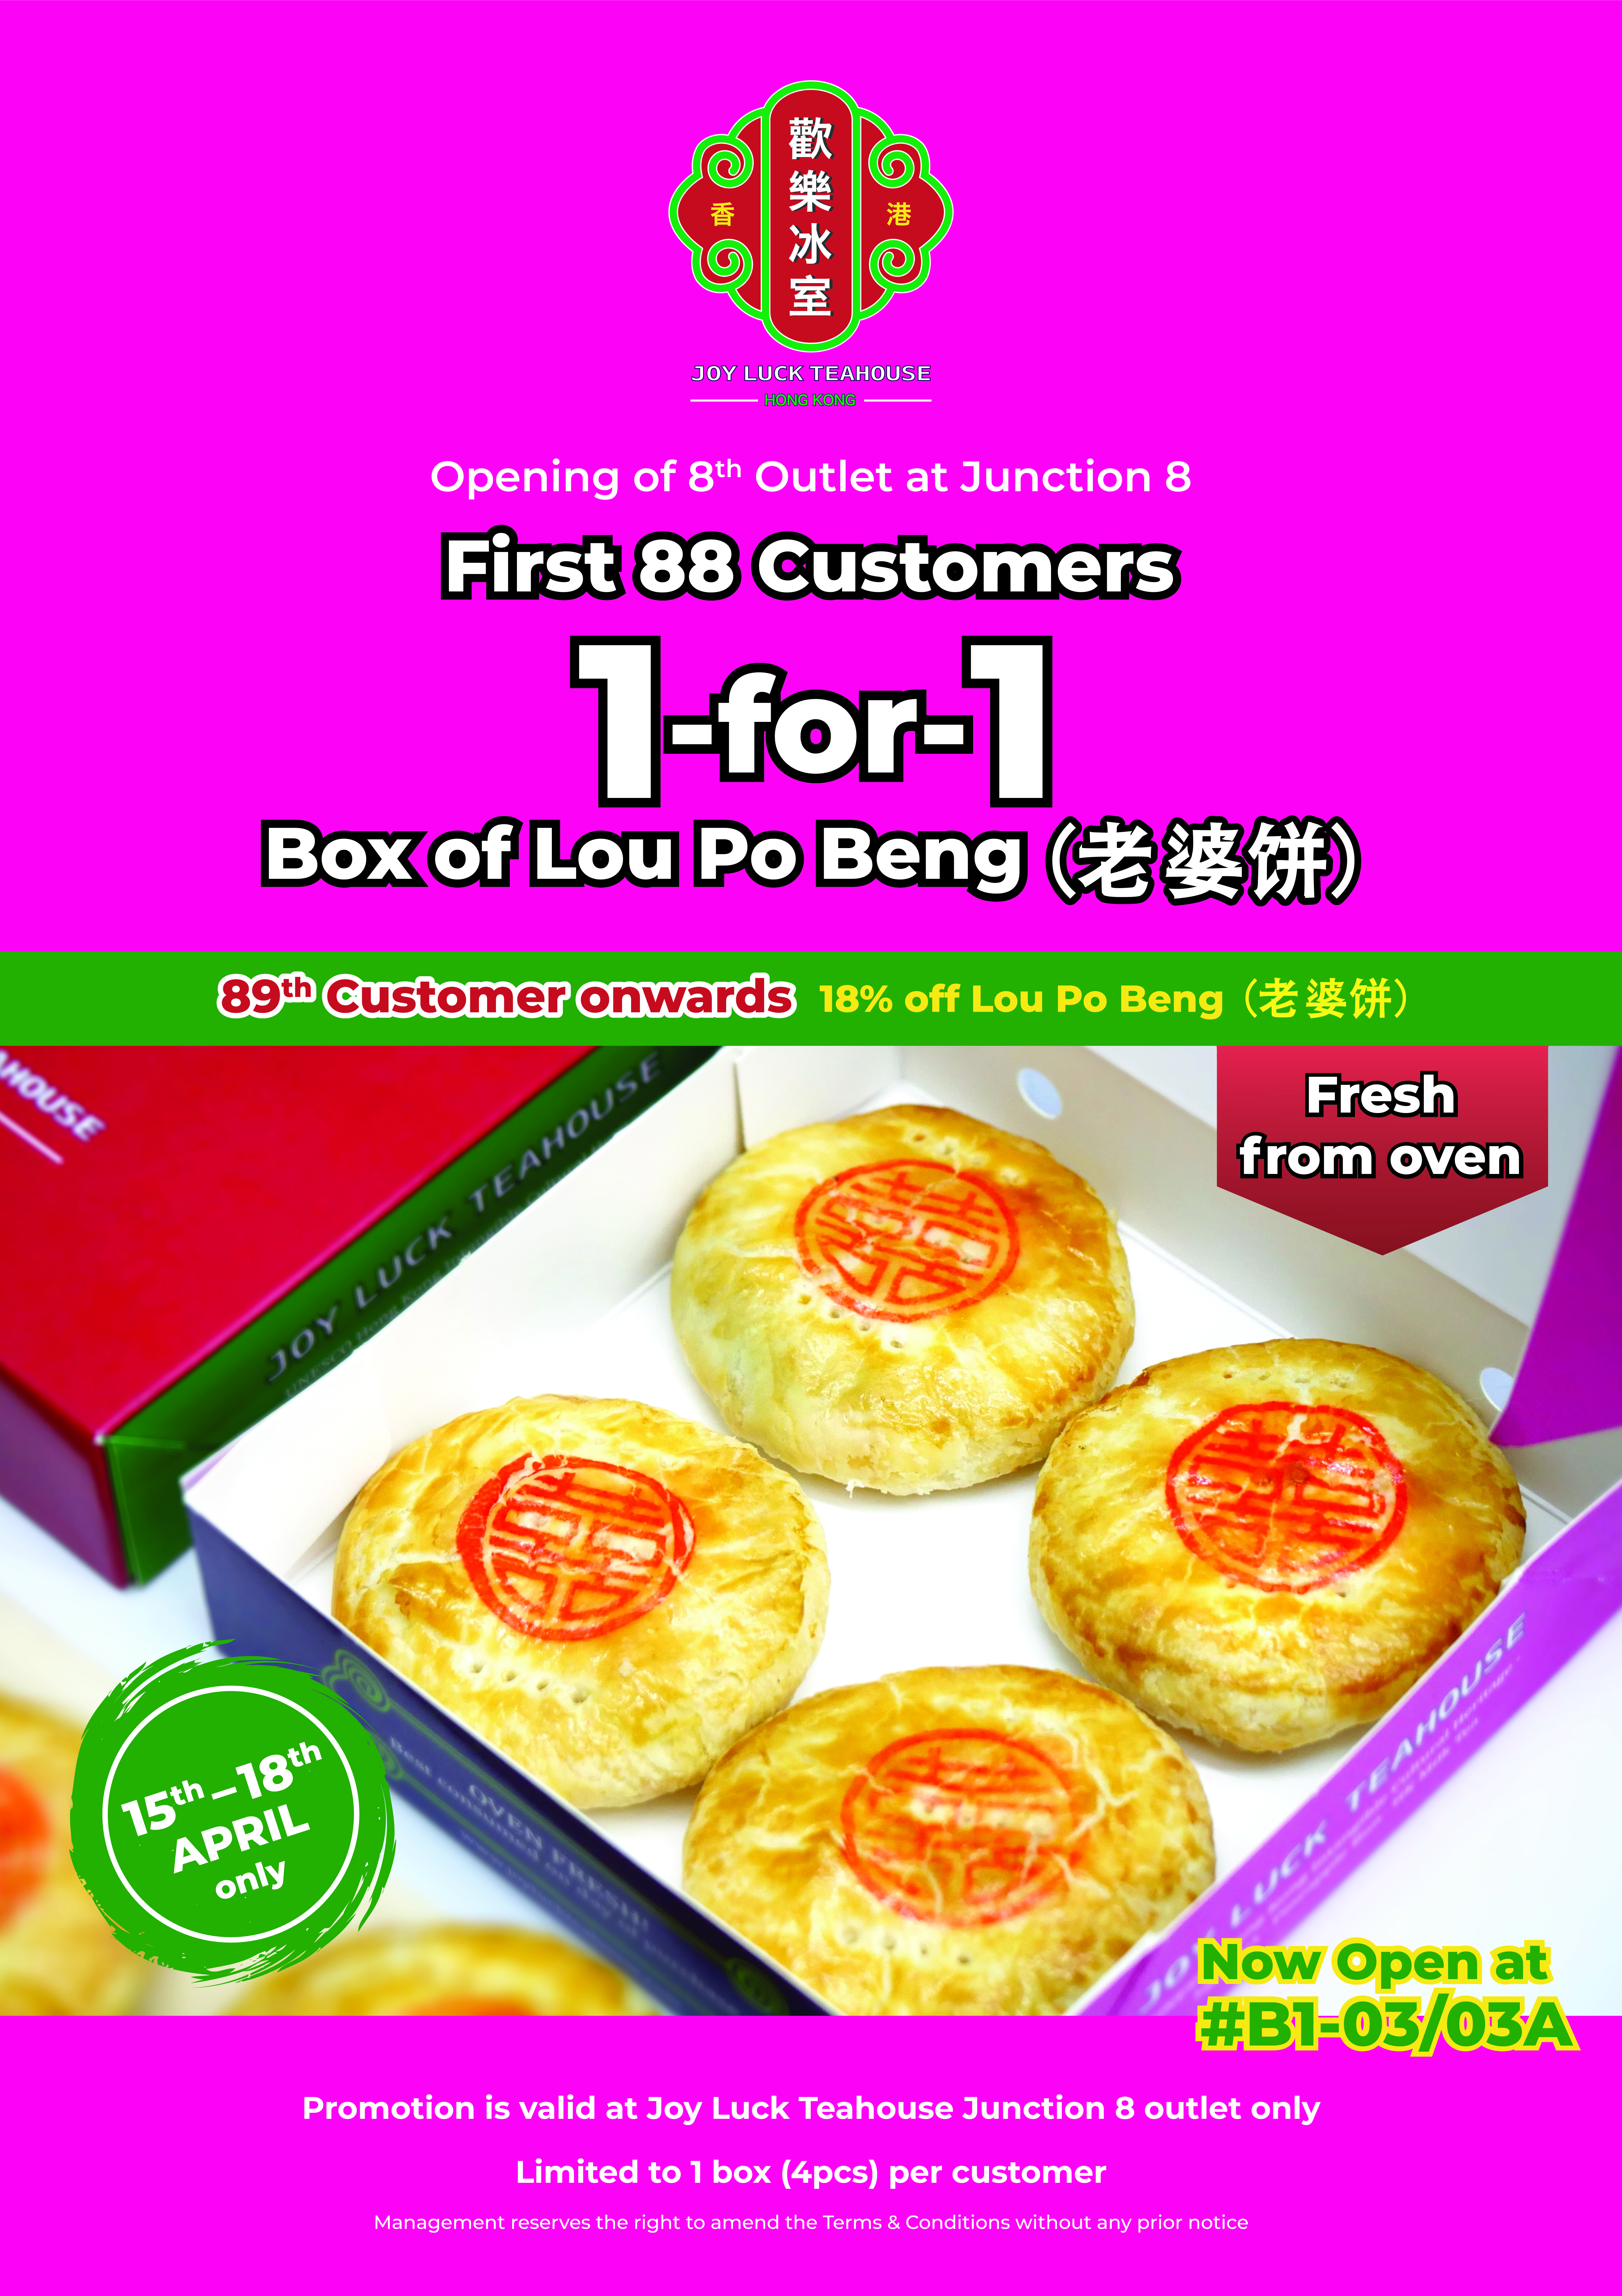 Enjoy 1-For-1 Authentic Hong Kong Lou Po Beng at Joy Luck Teahouse’s 8th Outlet at Junction 8 – Only for the first 88 Customers of the Day (15-18 April)! - 1